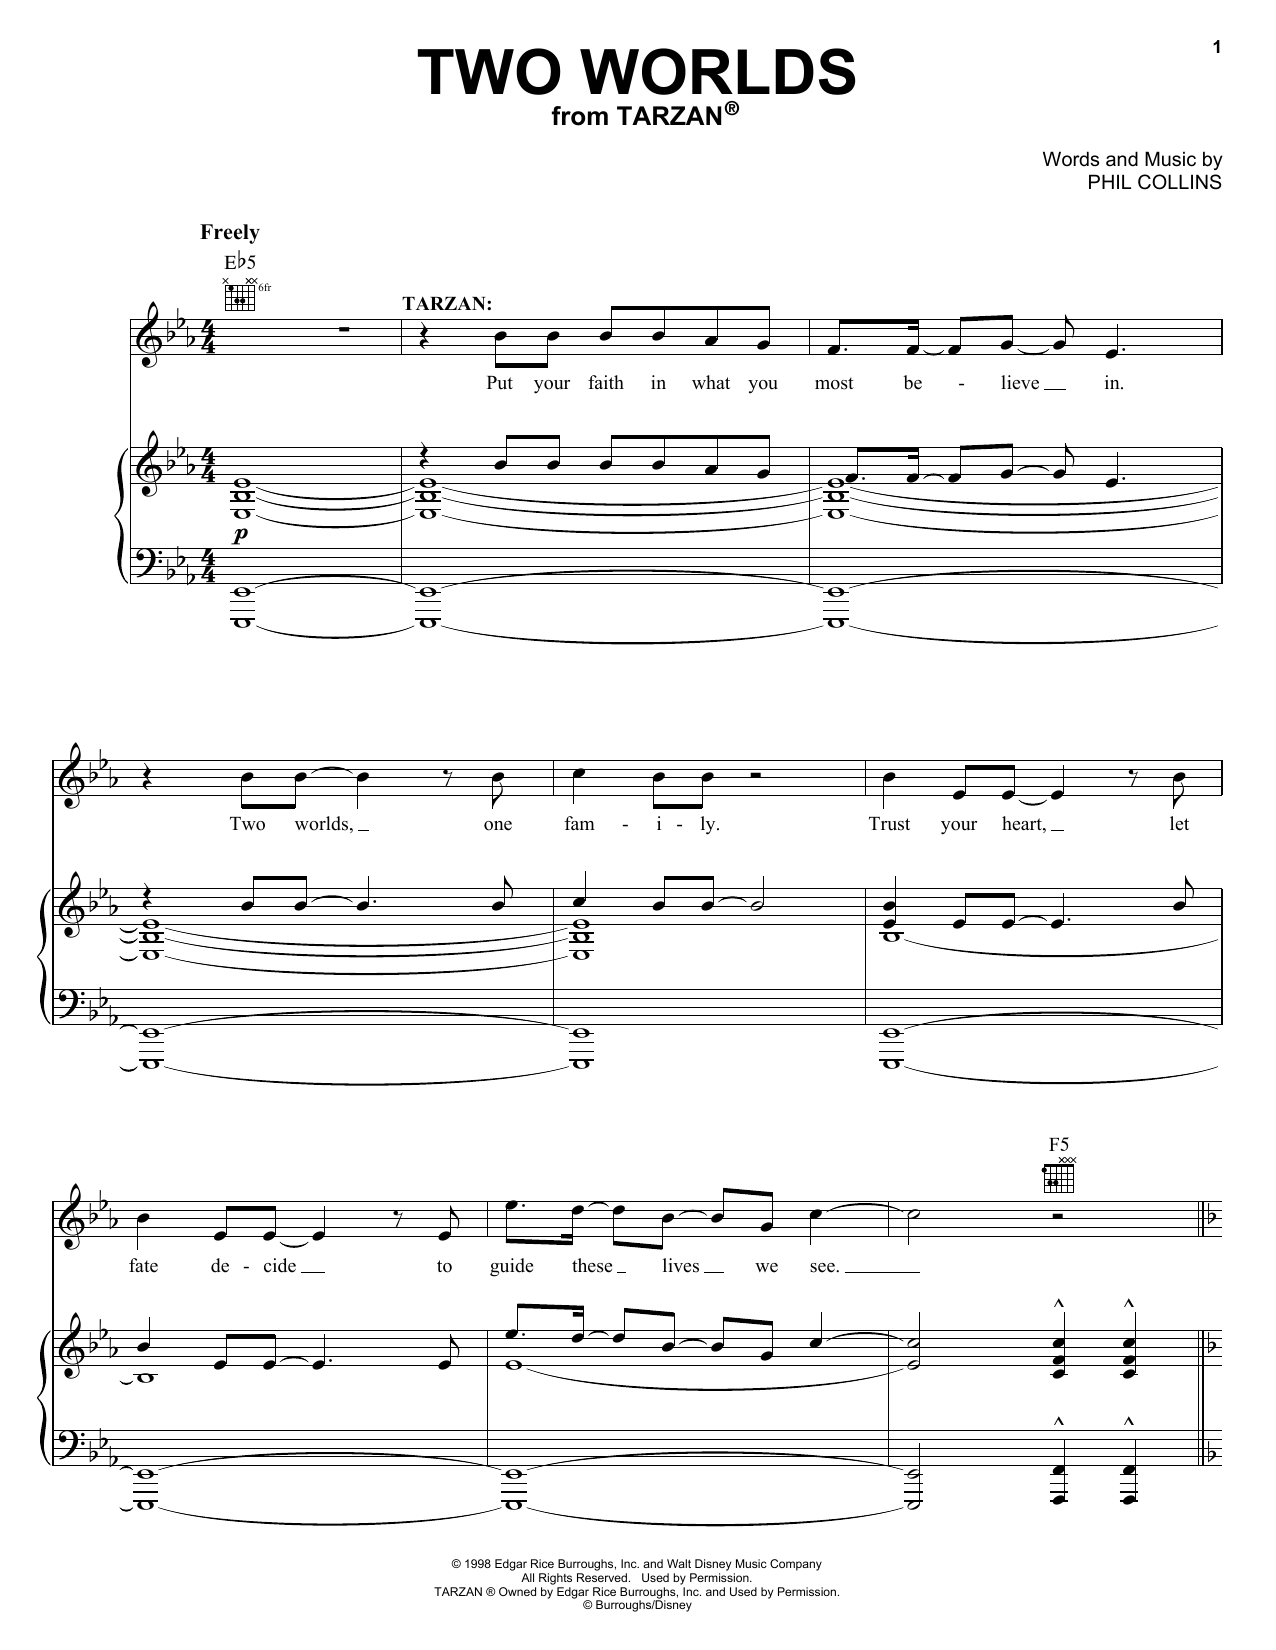 Download Phil Collins Two Worlds Sheet Music